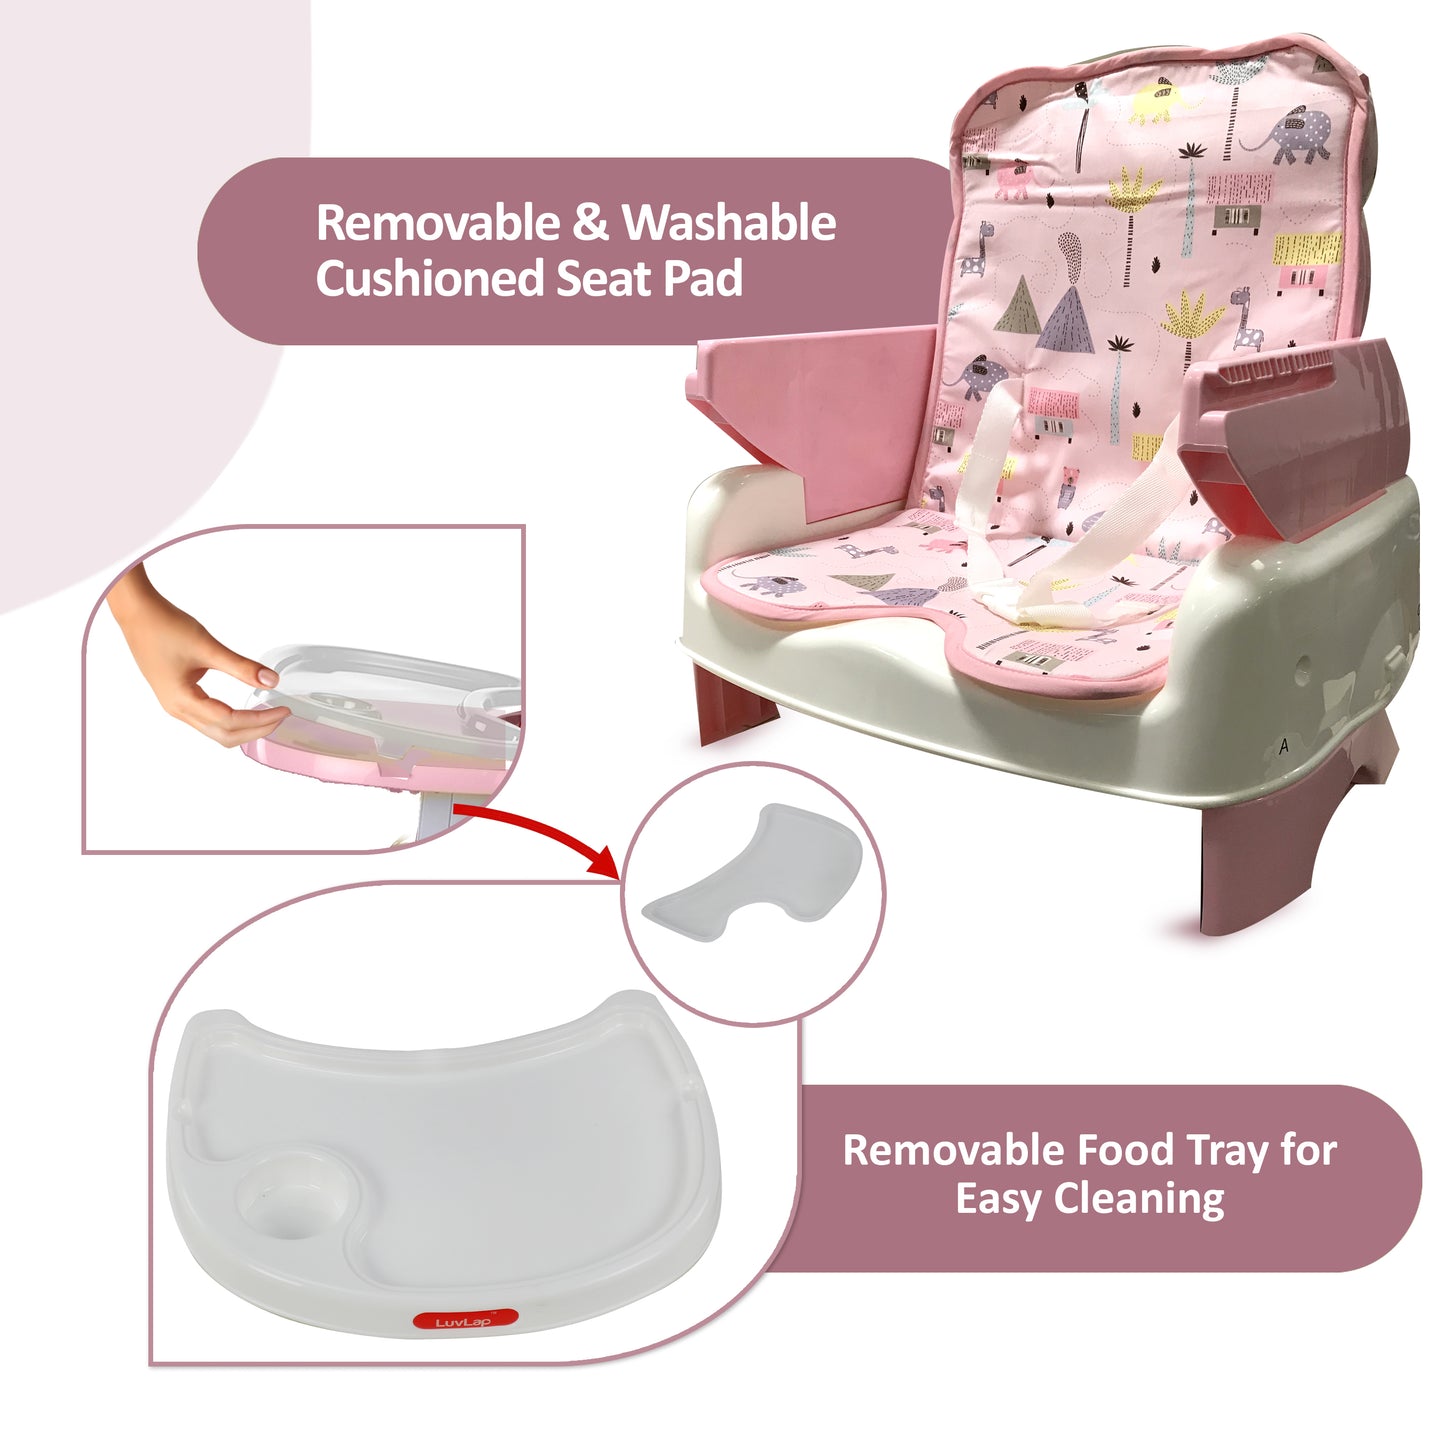 4-In-1 Baby High Chair, Pink